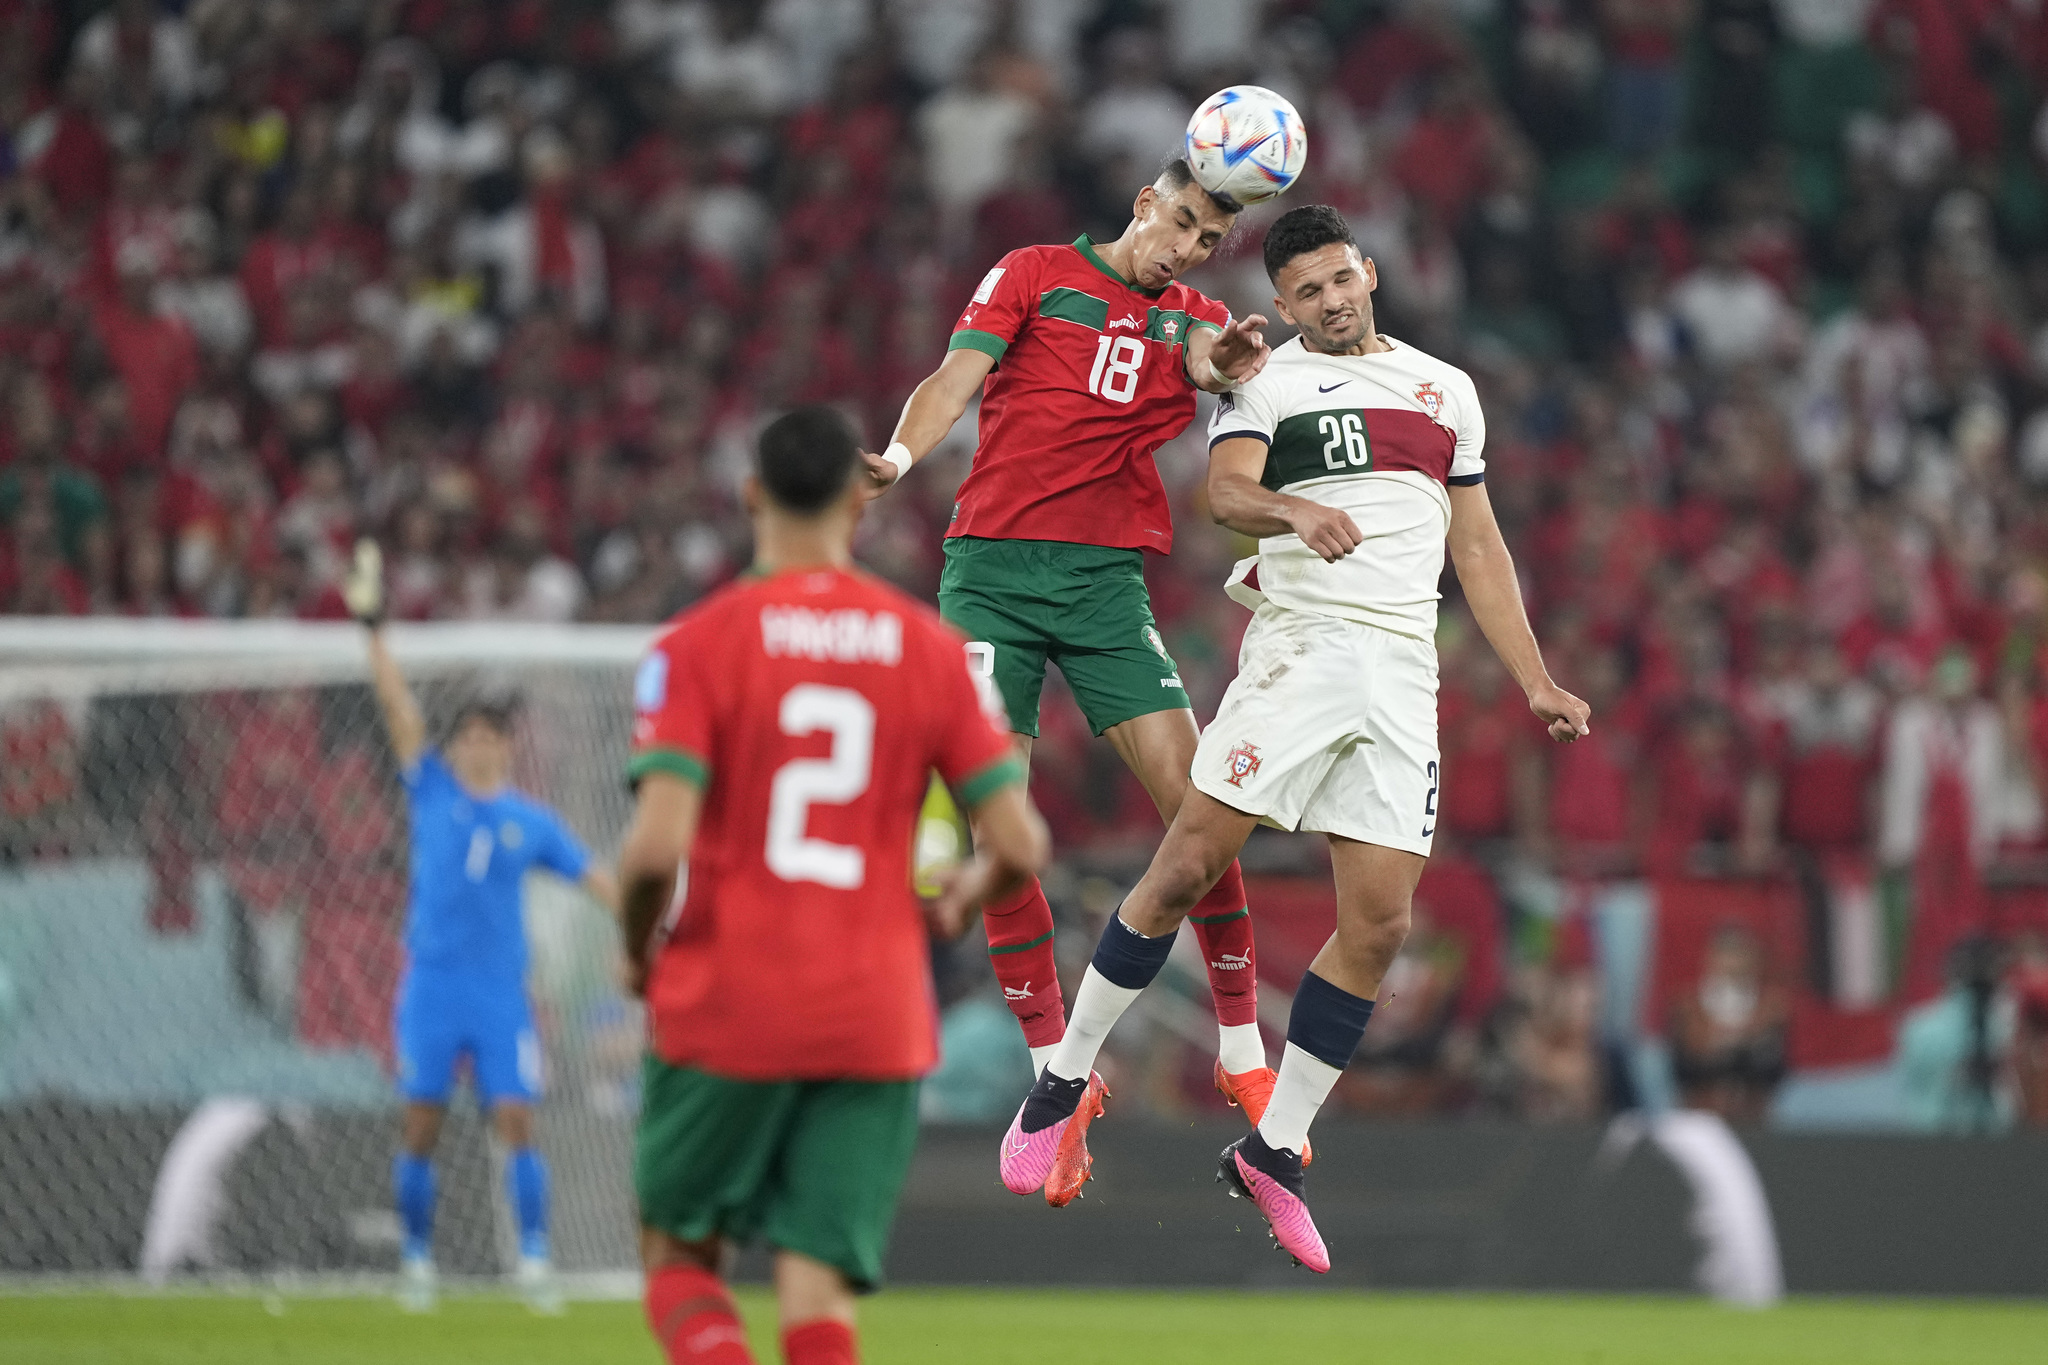 Morocco's Jawad El Yamiq, left, jumps for a header with  lt;HIT gt;Portugal lt;/HIT gt;'s Goncalo Ramos during the World Cup quarterfinal soccer match between Morocco and  lt;HIT gt;Portugal lt;/HIT gt;, at Al Thumama Stadium in Doha, Qatar, Saturday, Dec. 10, 2022. (AP Photo/Martin Meissner)